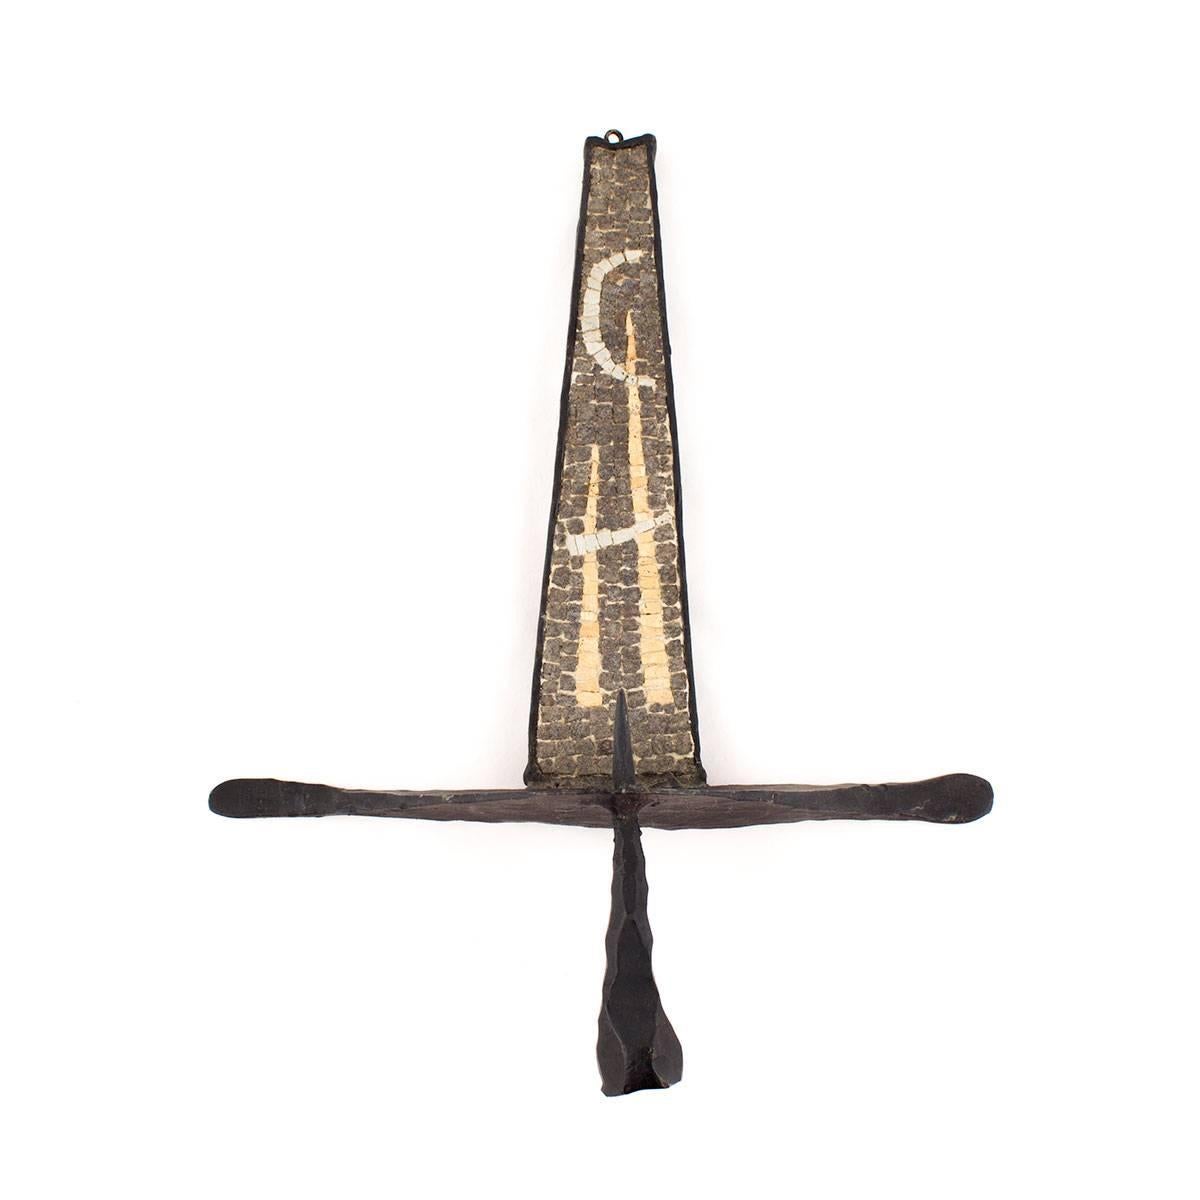 Hand Forged Iron  Stone Mosaic  Pricket Sconce Candelabra 
Holocaust Memorial Judaic Wall Sconce Sculpture

David Palombo was an Israeli sculptor and painter. He was born in Turkey and immigrated to the Land of Israel with his parents in 1923. In